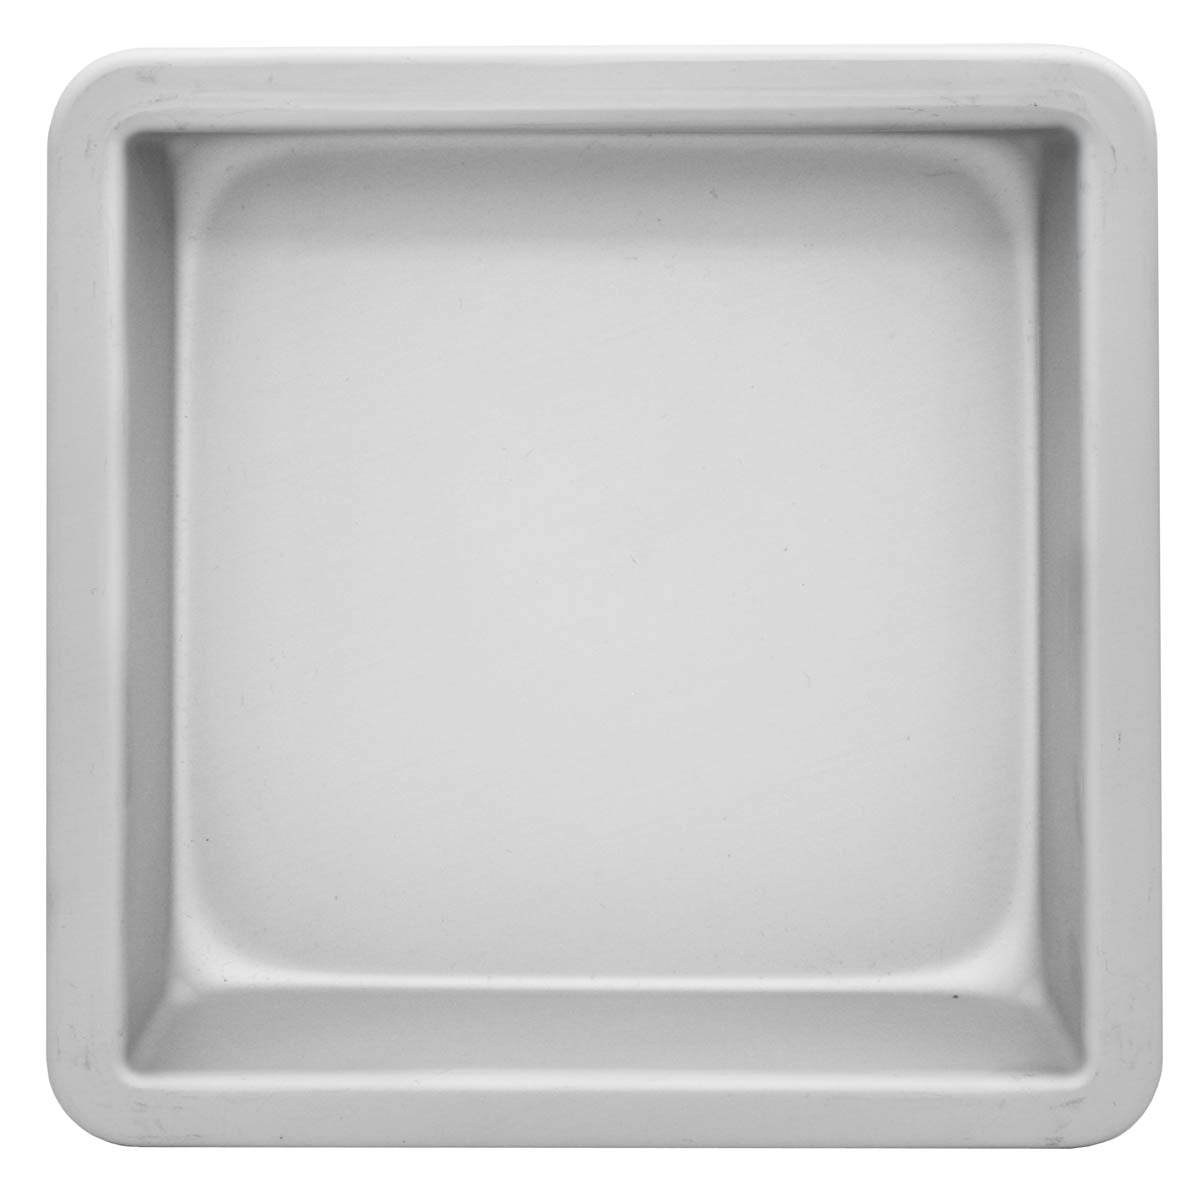 CartDub Pro Oil Removal Aluminum Tray top view (part of the kit)